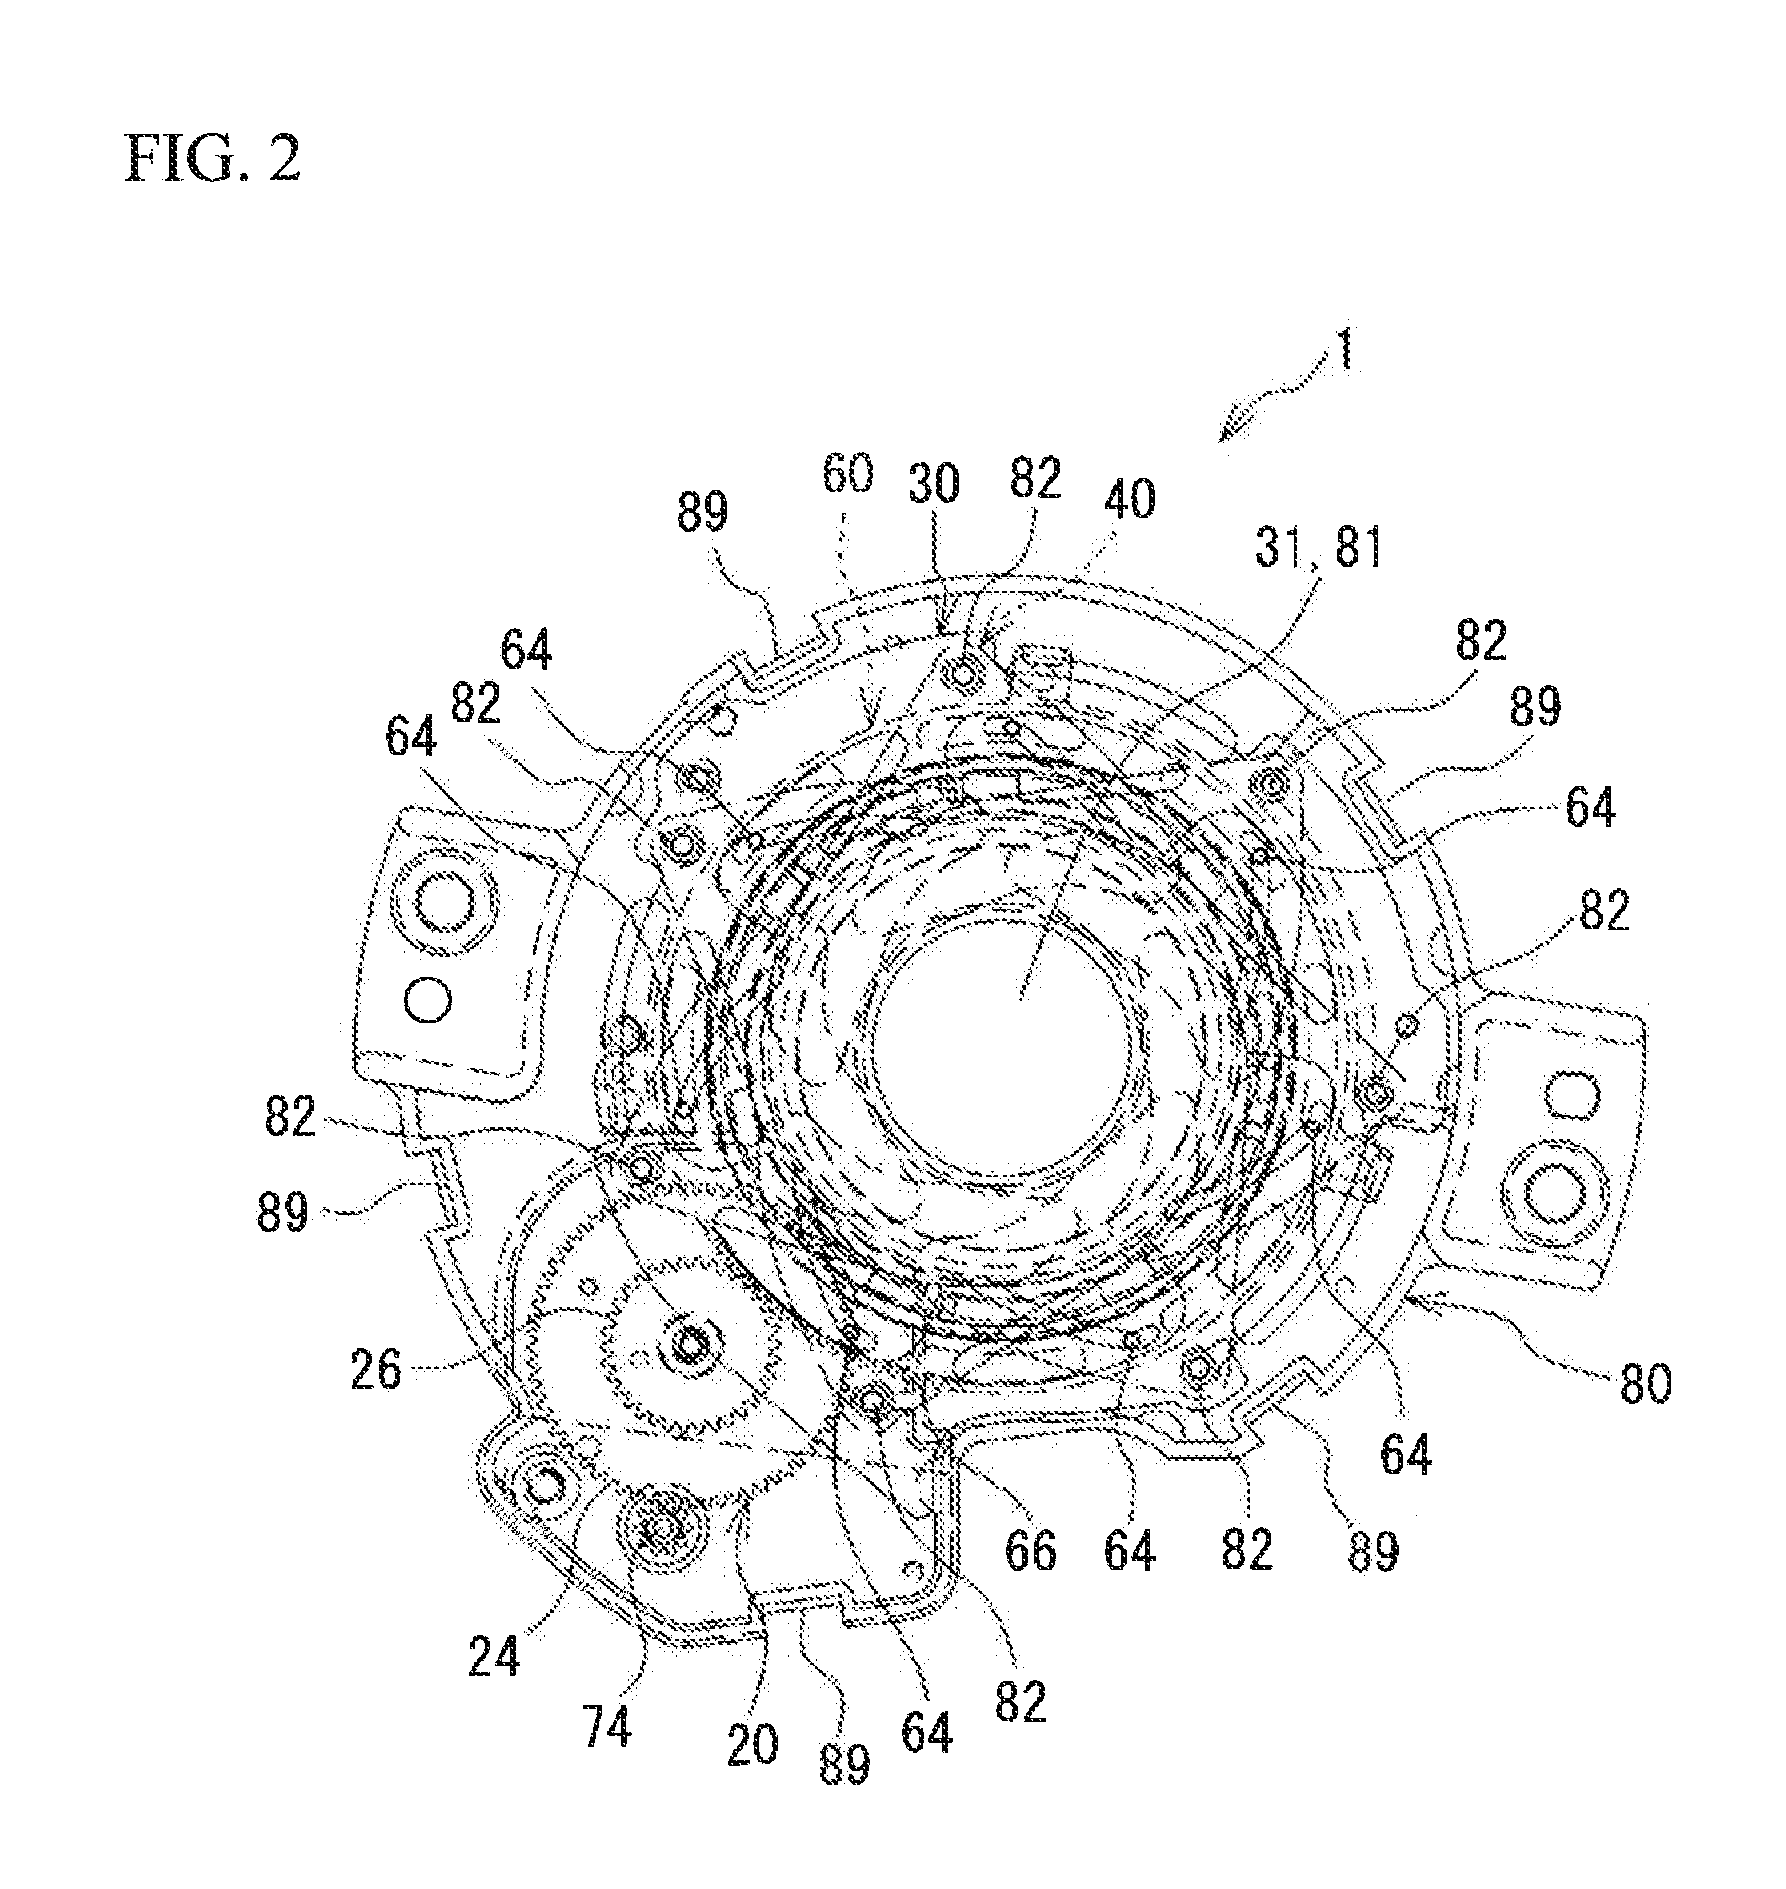 Aperture device and optical instrument